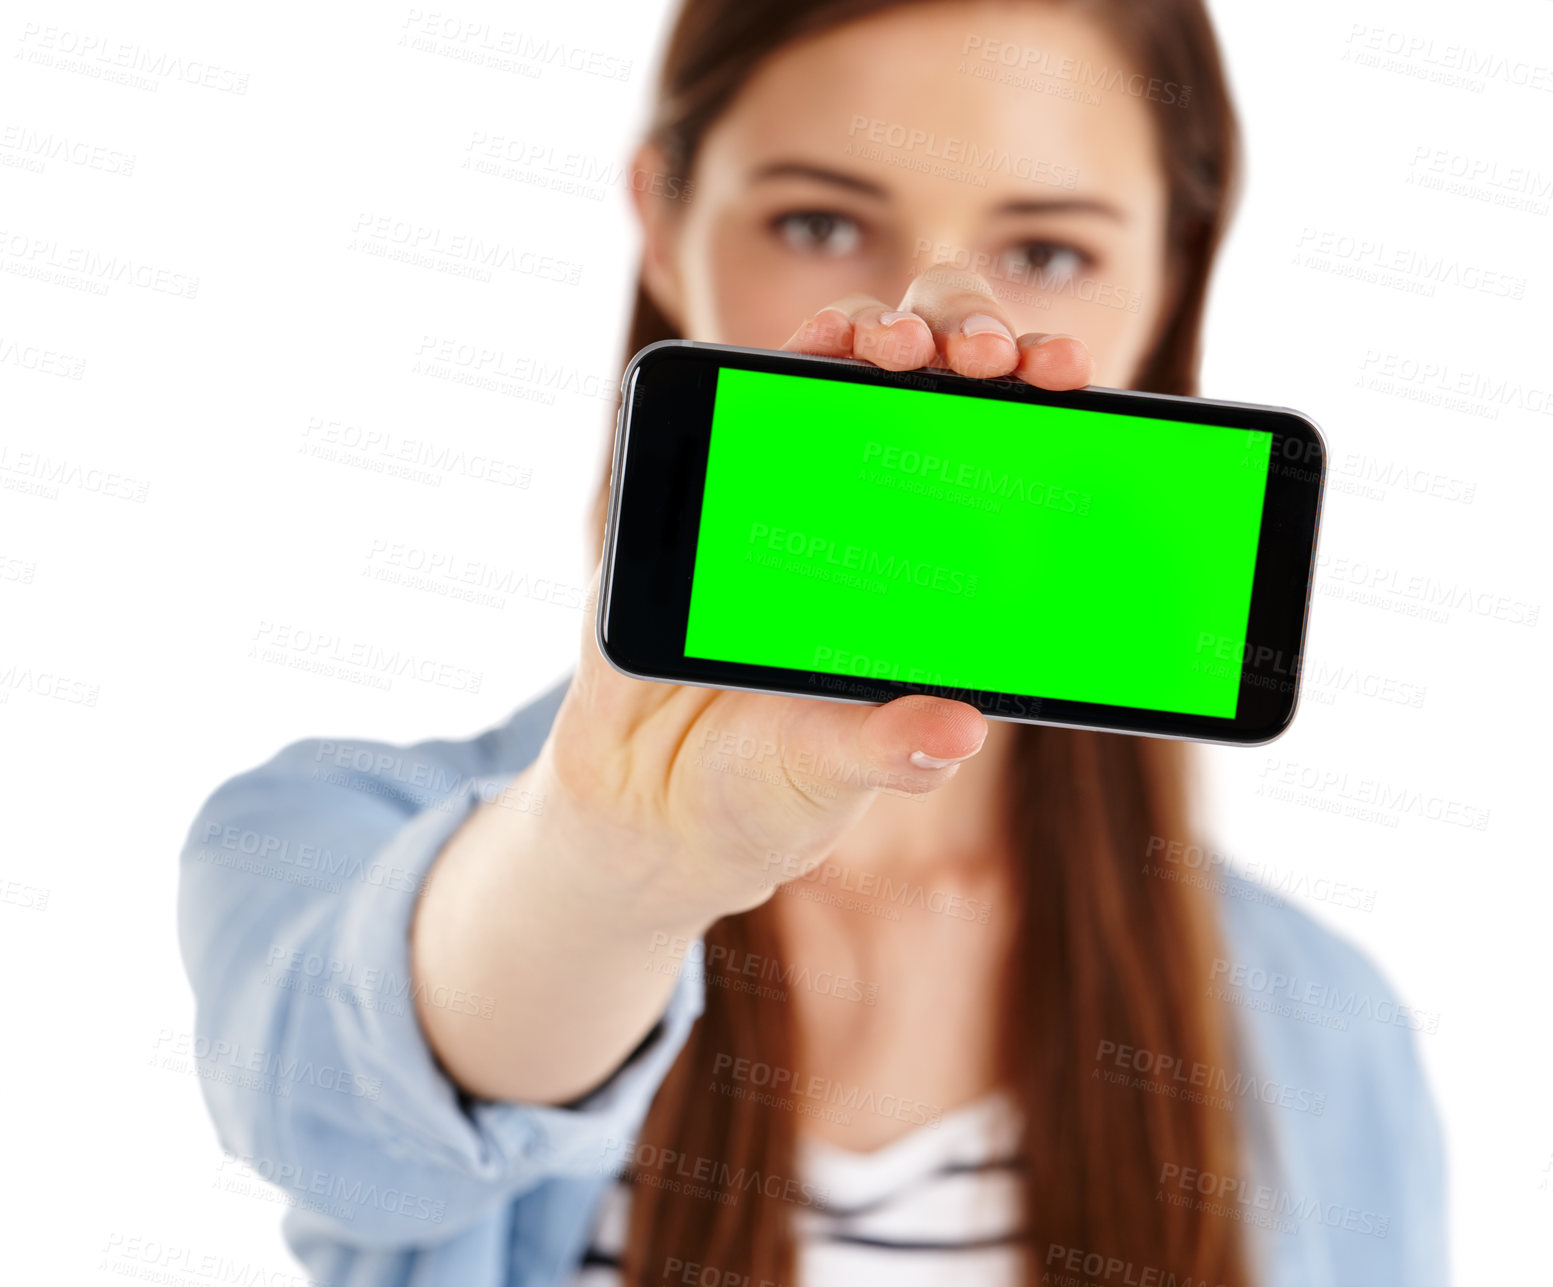 Buy stock photo A young woman holding a mobile phone with green screen copyspace